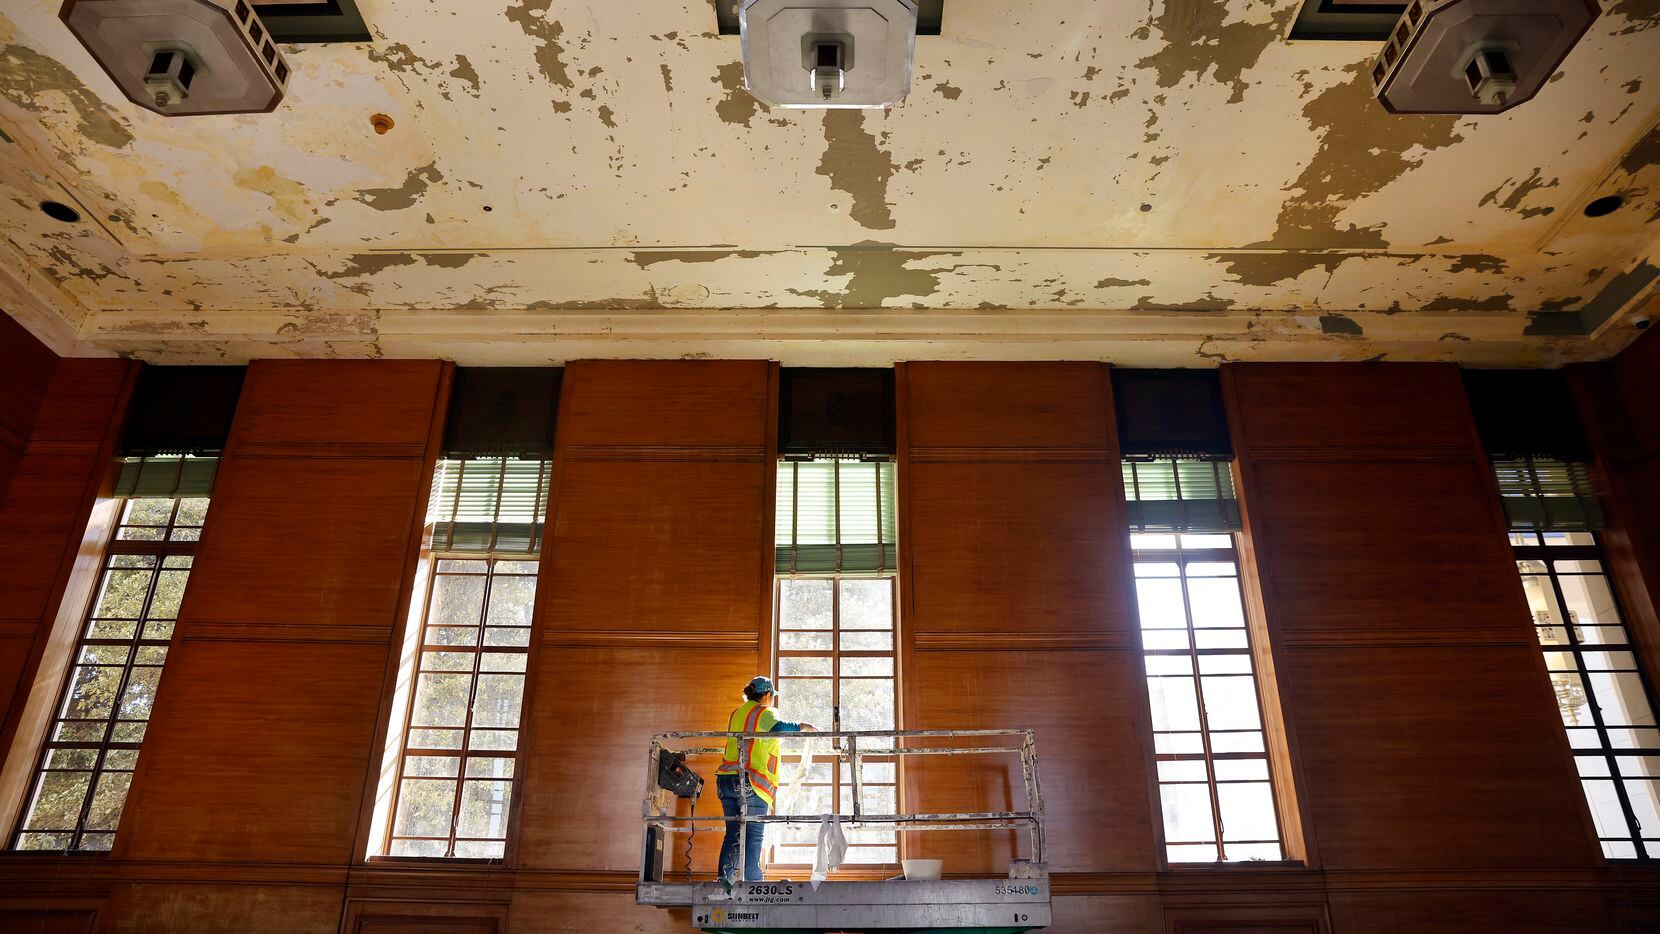 Contractors from Phoenix 1 Restoration have begun scraping loose paint in the East Texas Room where water damaged the Hall of State building at Fair Park in Dallas.